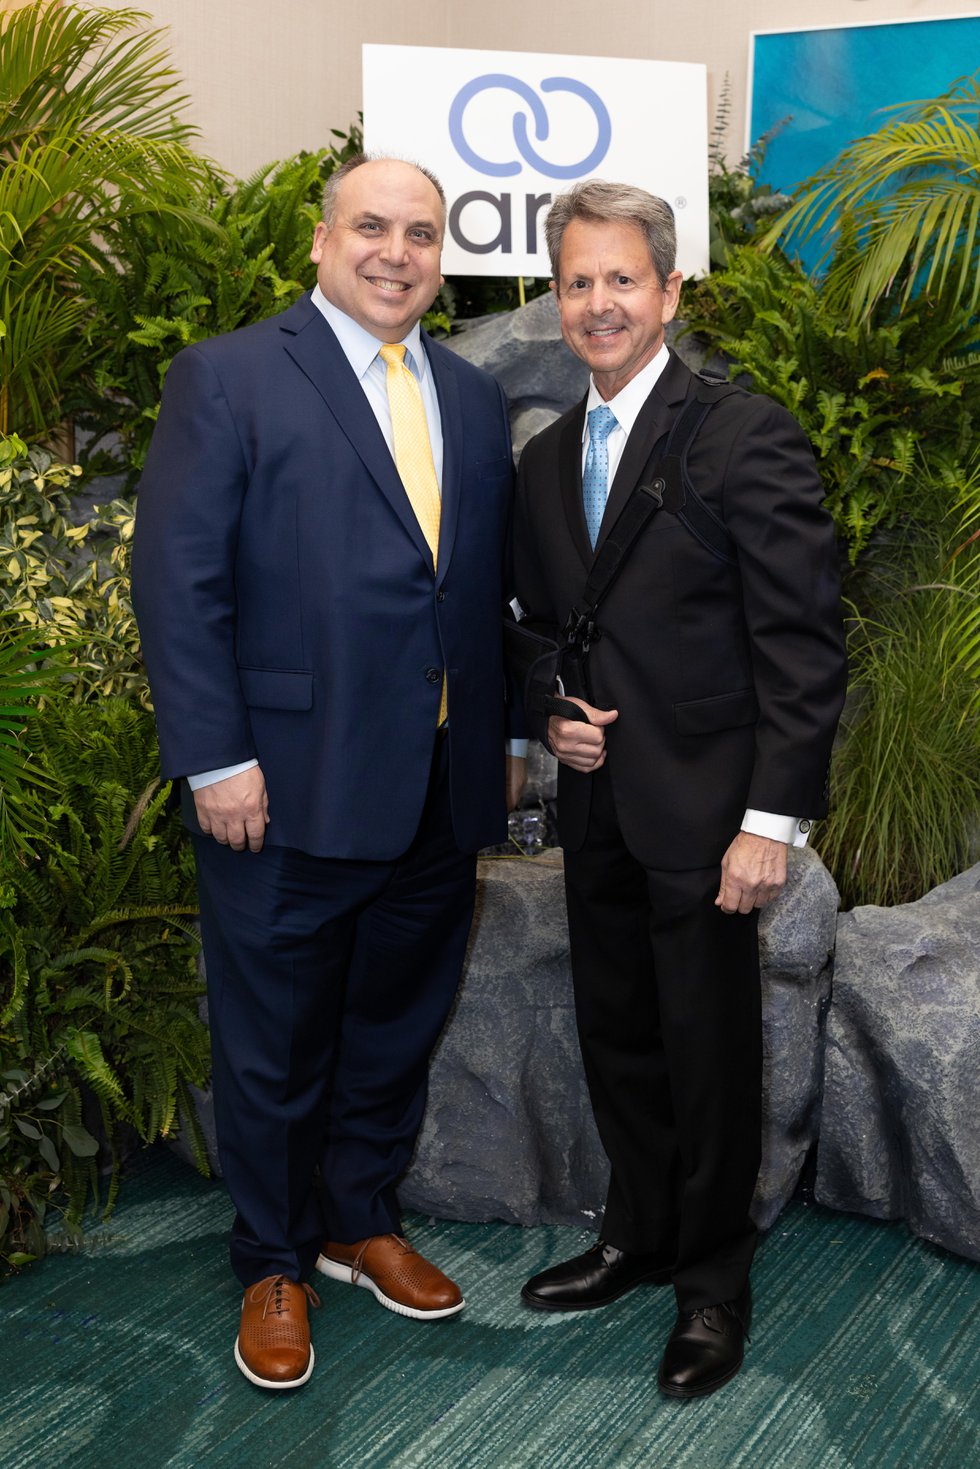 Caron CEO John Driscoll and Palm Beach County Commissioner Gregg Weiss_web.jpg